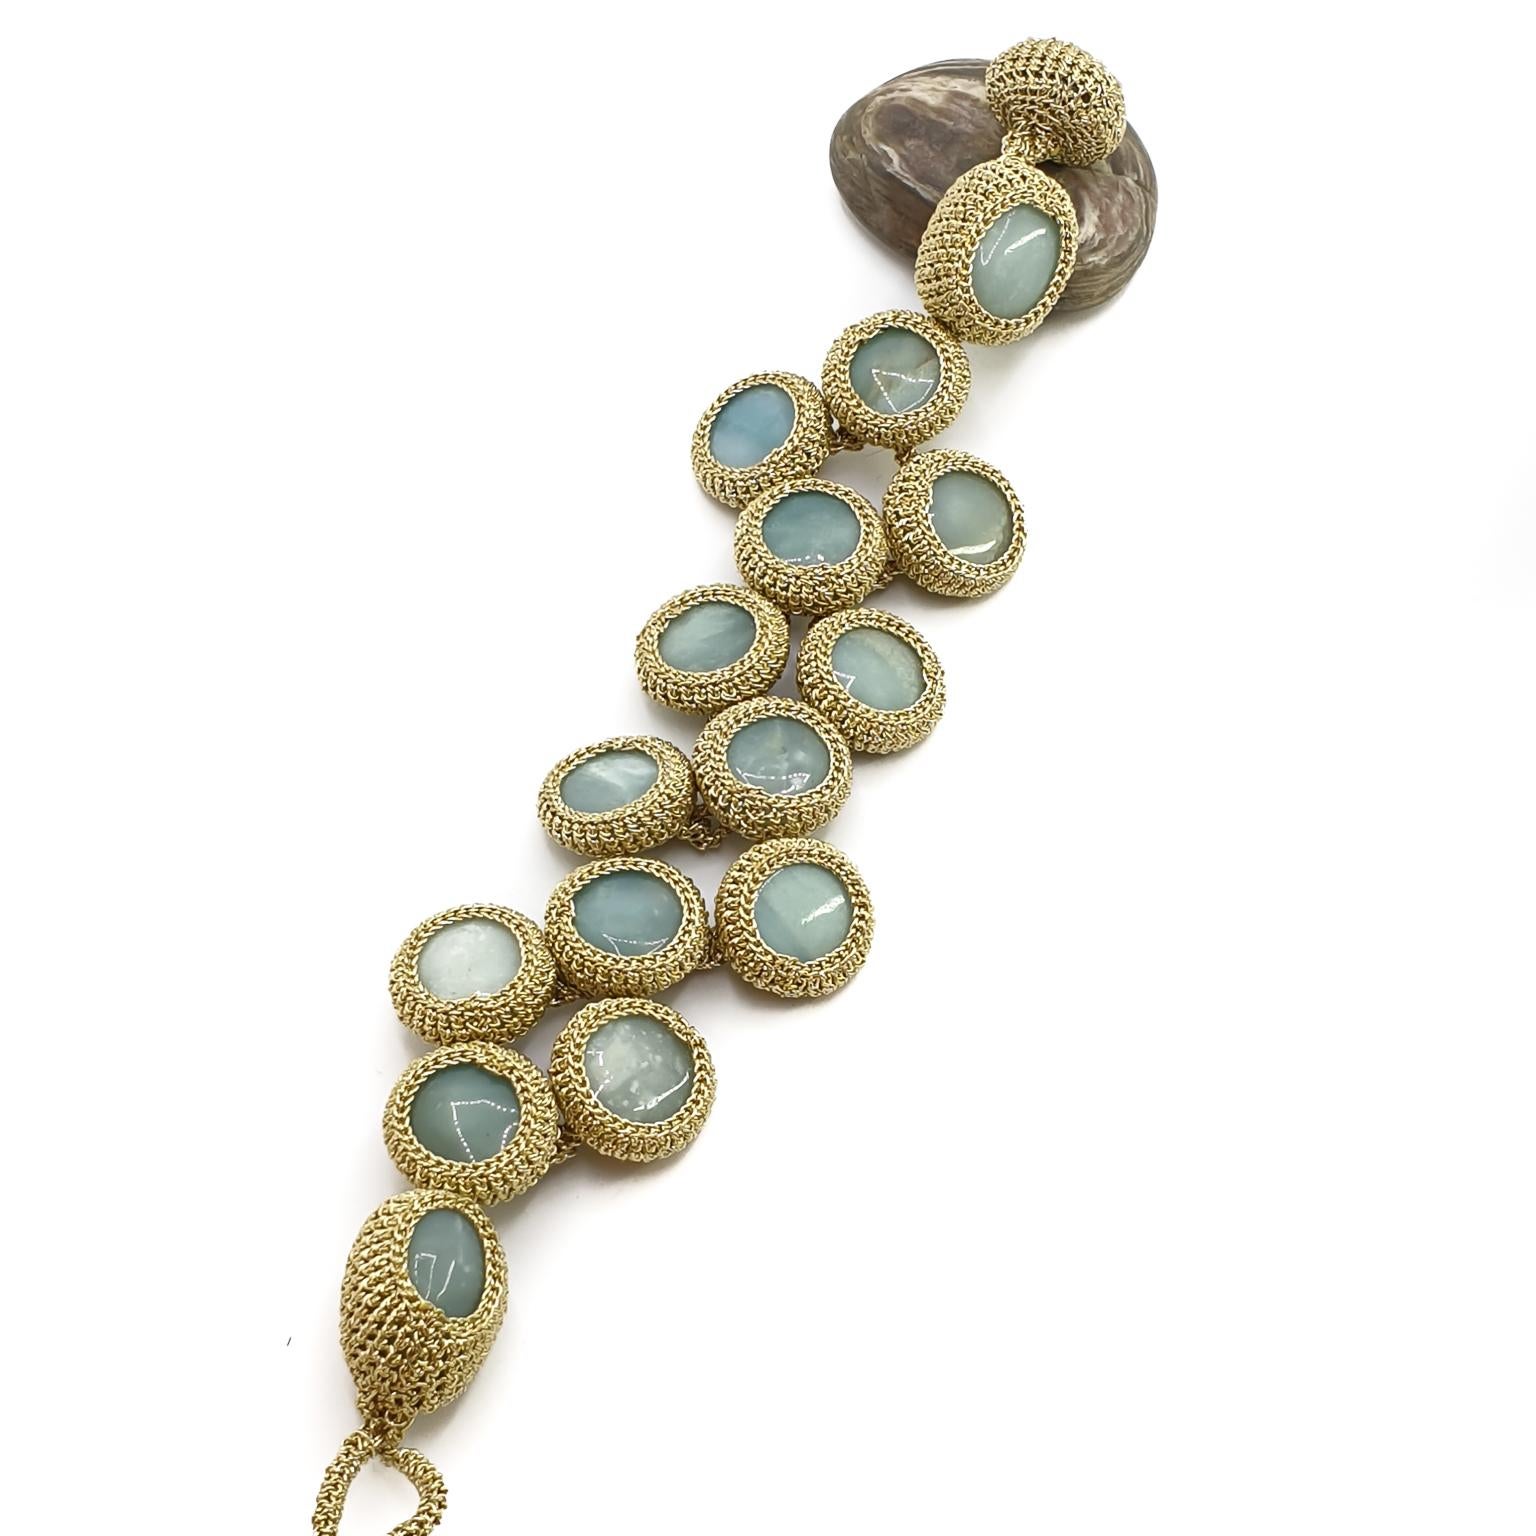 This is a One of a Kind crochet Amazonite stones bracelet. Each stone is crochet separately and then crochet together to create this beautiful bracelet.  The stones sizes range between 16mm round stones to 20mm rectangular shaped stones at the ends